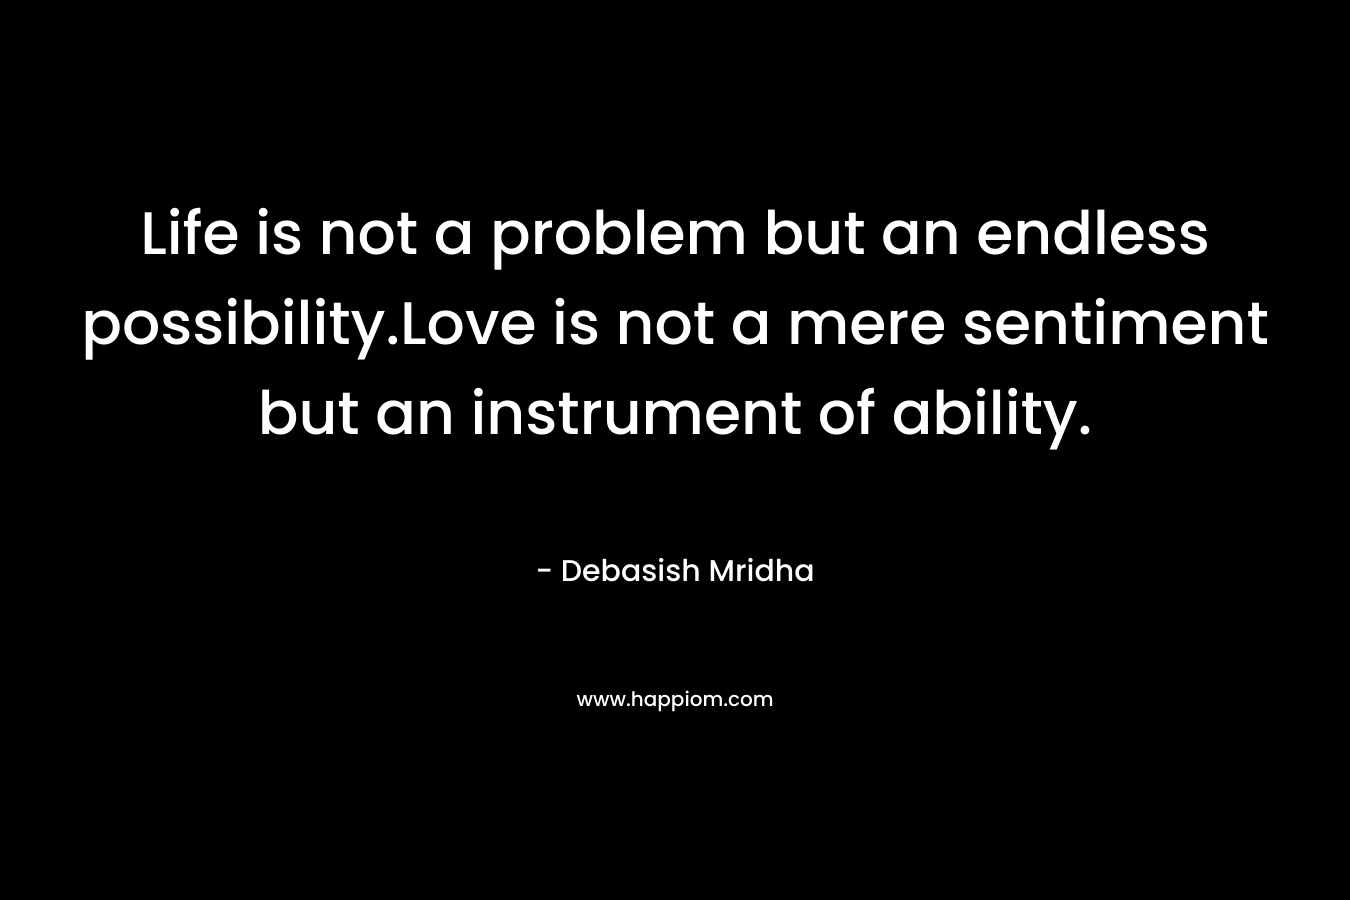 Life is not a problem but an endless possibility.Love is not a mere sentiment but an instrument of ability.